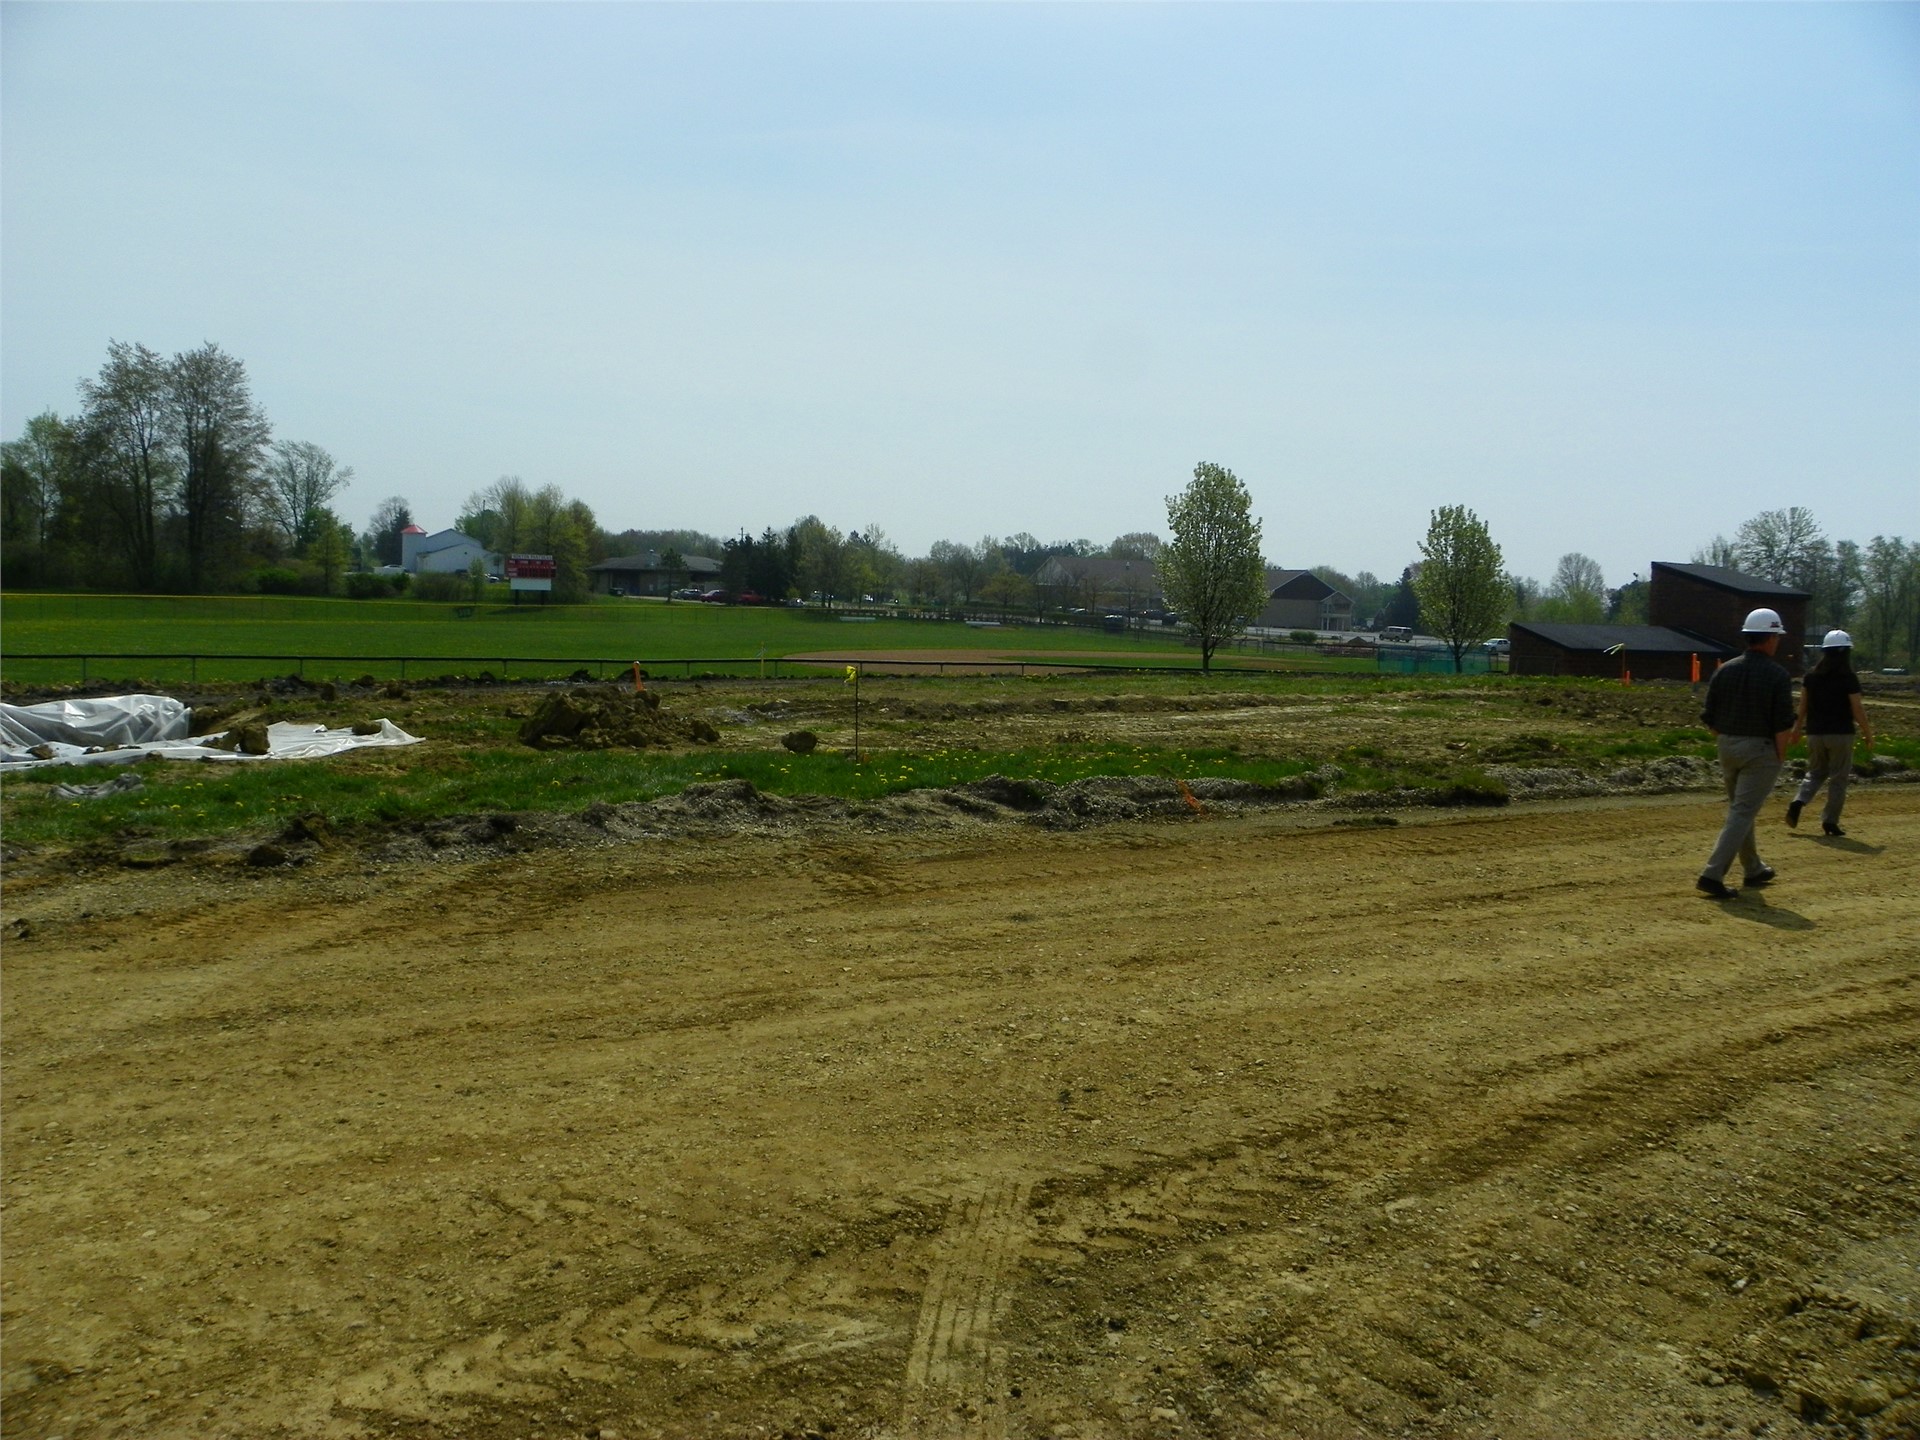 View of existing baseball field from Northwest corner of visitor side of stadium